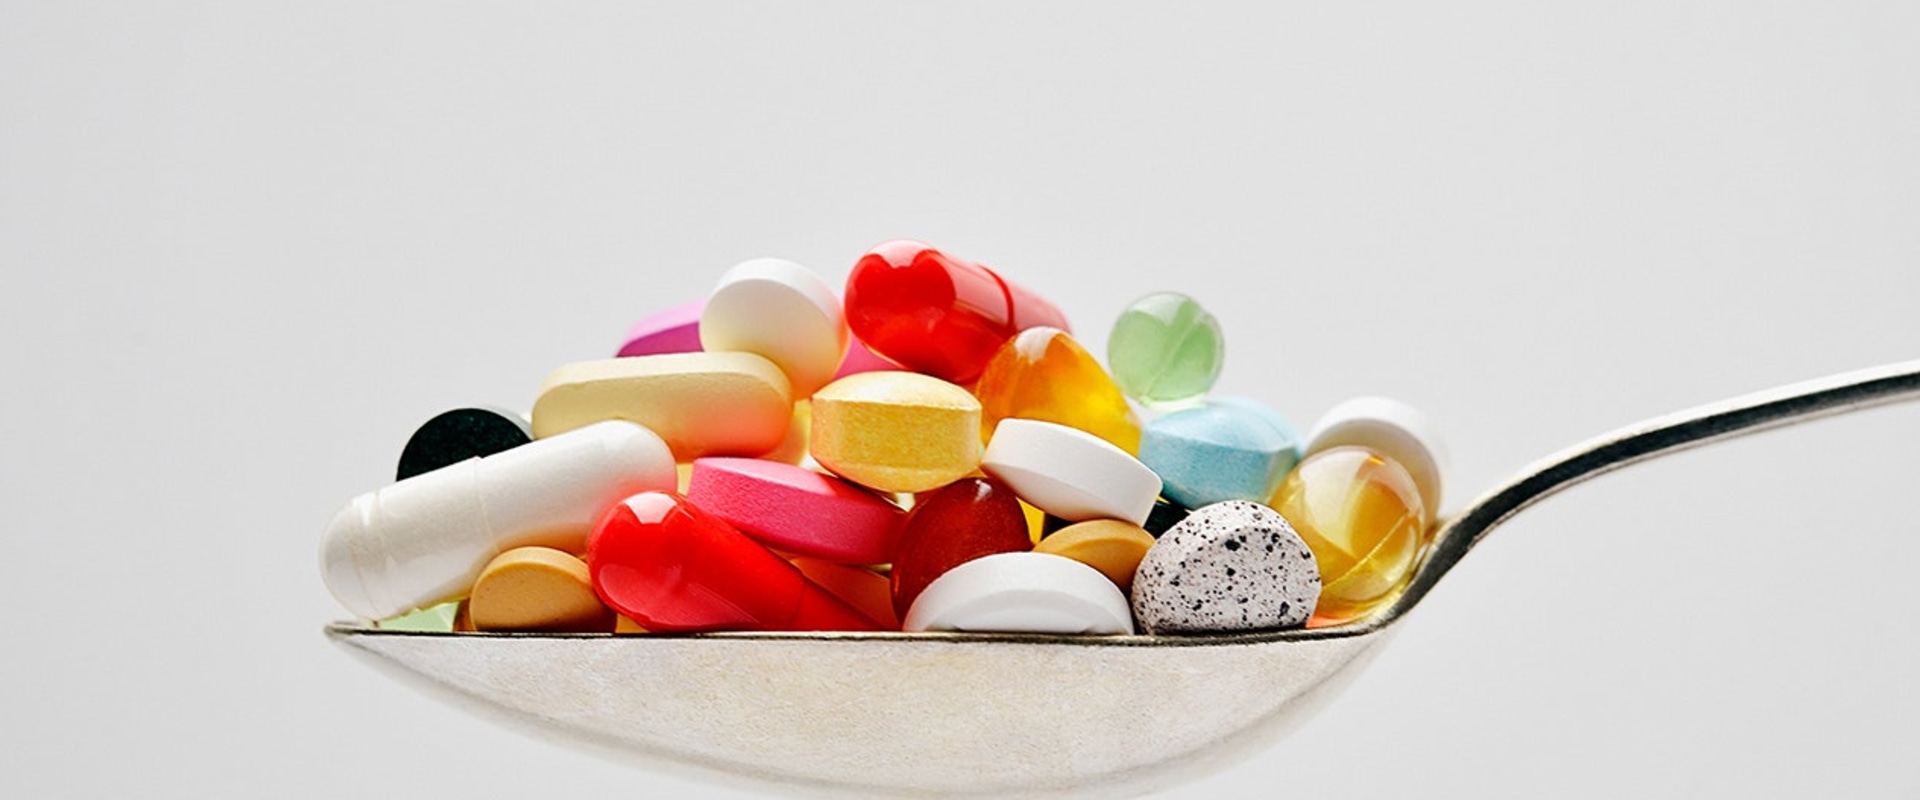 The Dangers of Taking Too Little Vitamins and Supplements